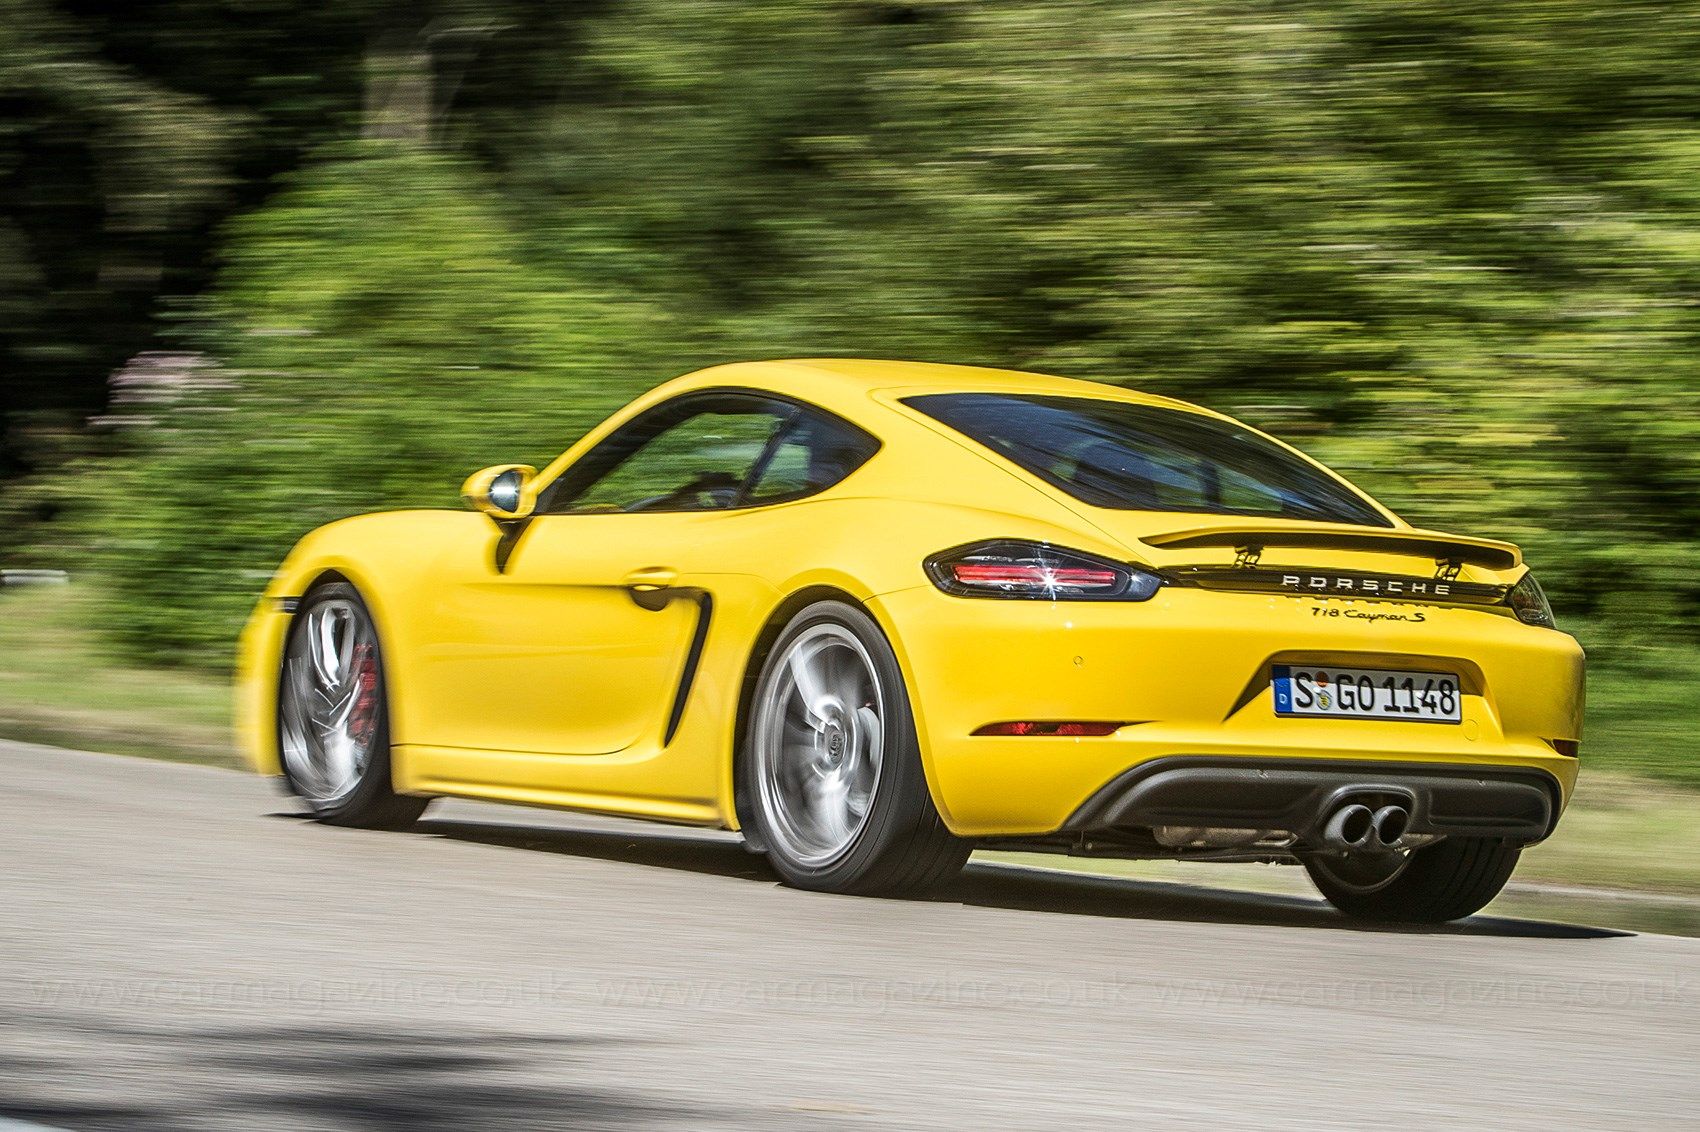 The Yellow Cayman